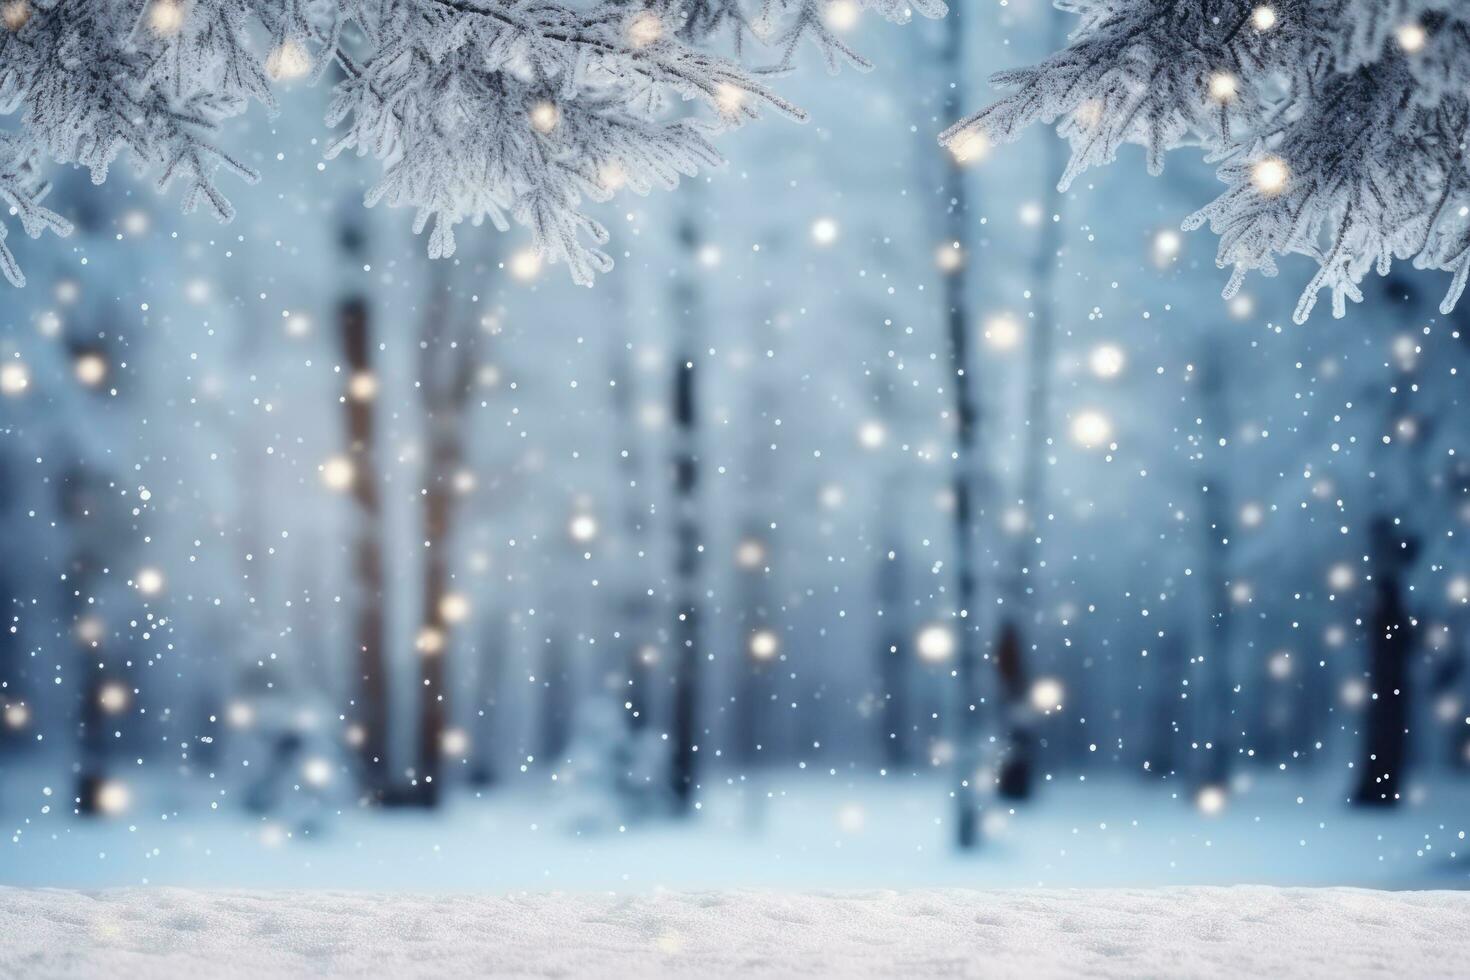 Blue Christmas background with snowflakes photo